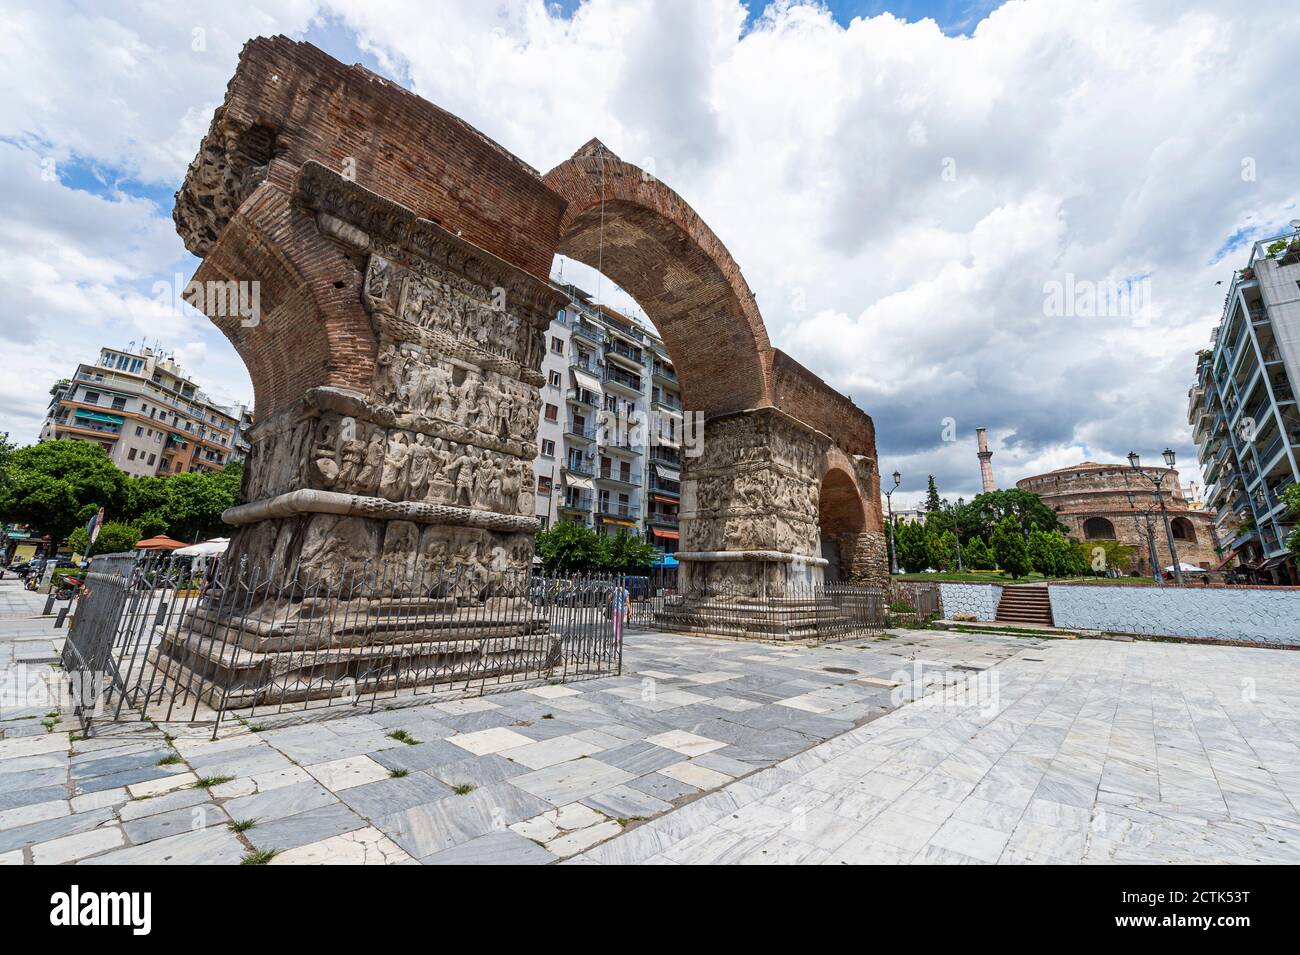 Greece, Central Macedonia, Thessaloniki, Ancient Arch of Galerius Stock Photo